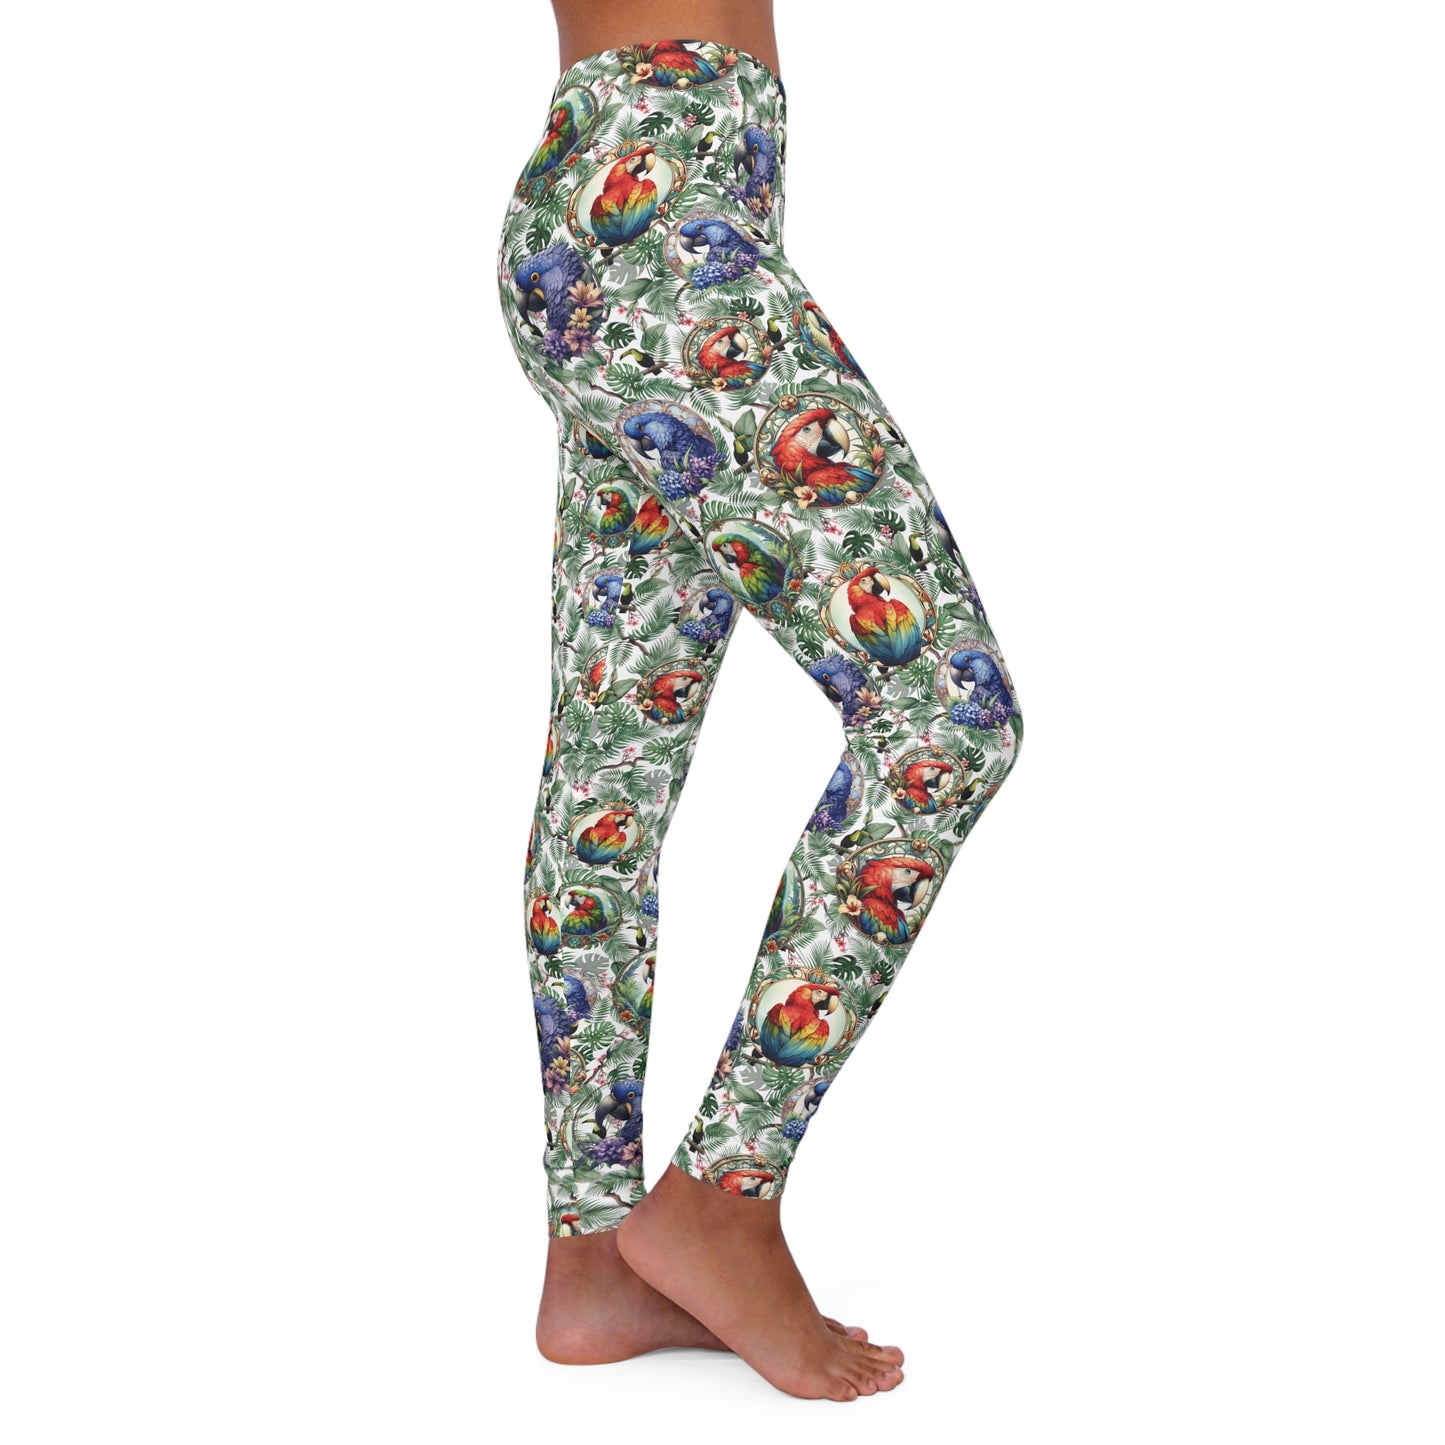 Colorful Macaw Leggings for Women - Vibrant Tropical Bird Print, Comfortable Fit, Perfect for Yoga, Pilates Fitness, Gym Clothes Work out